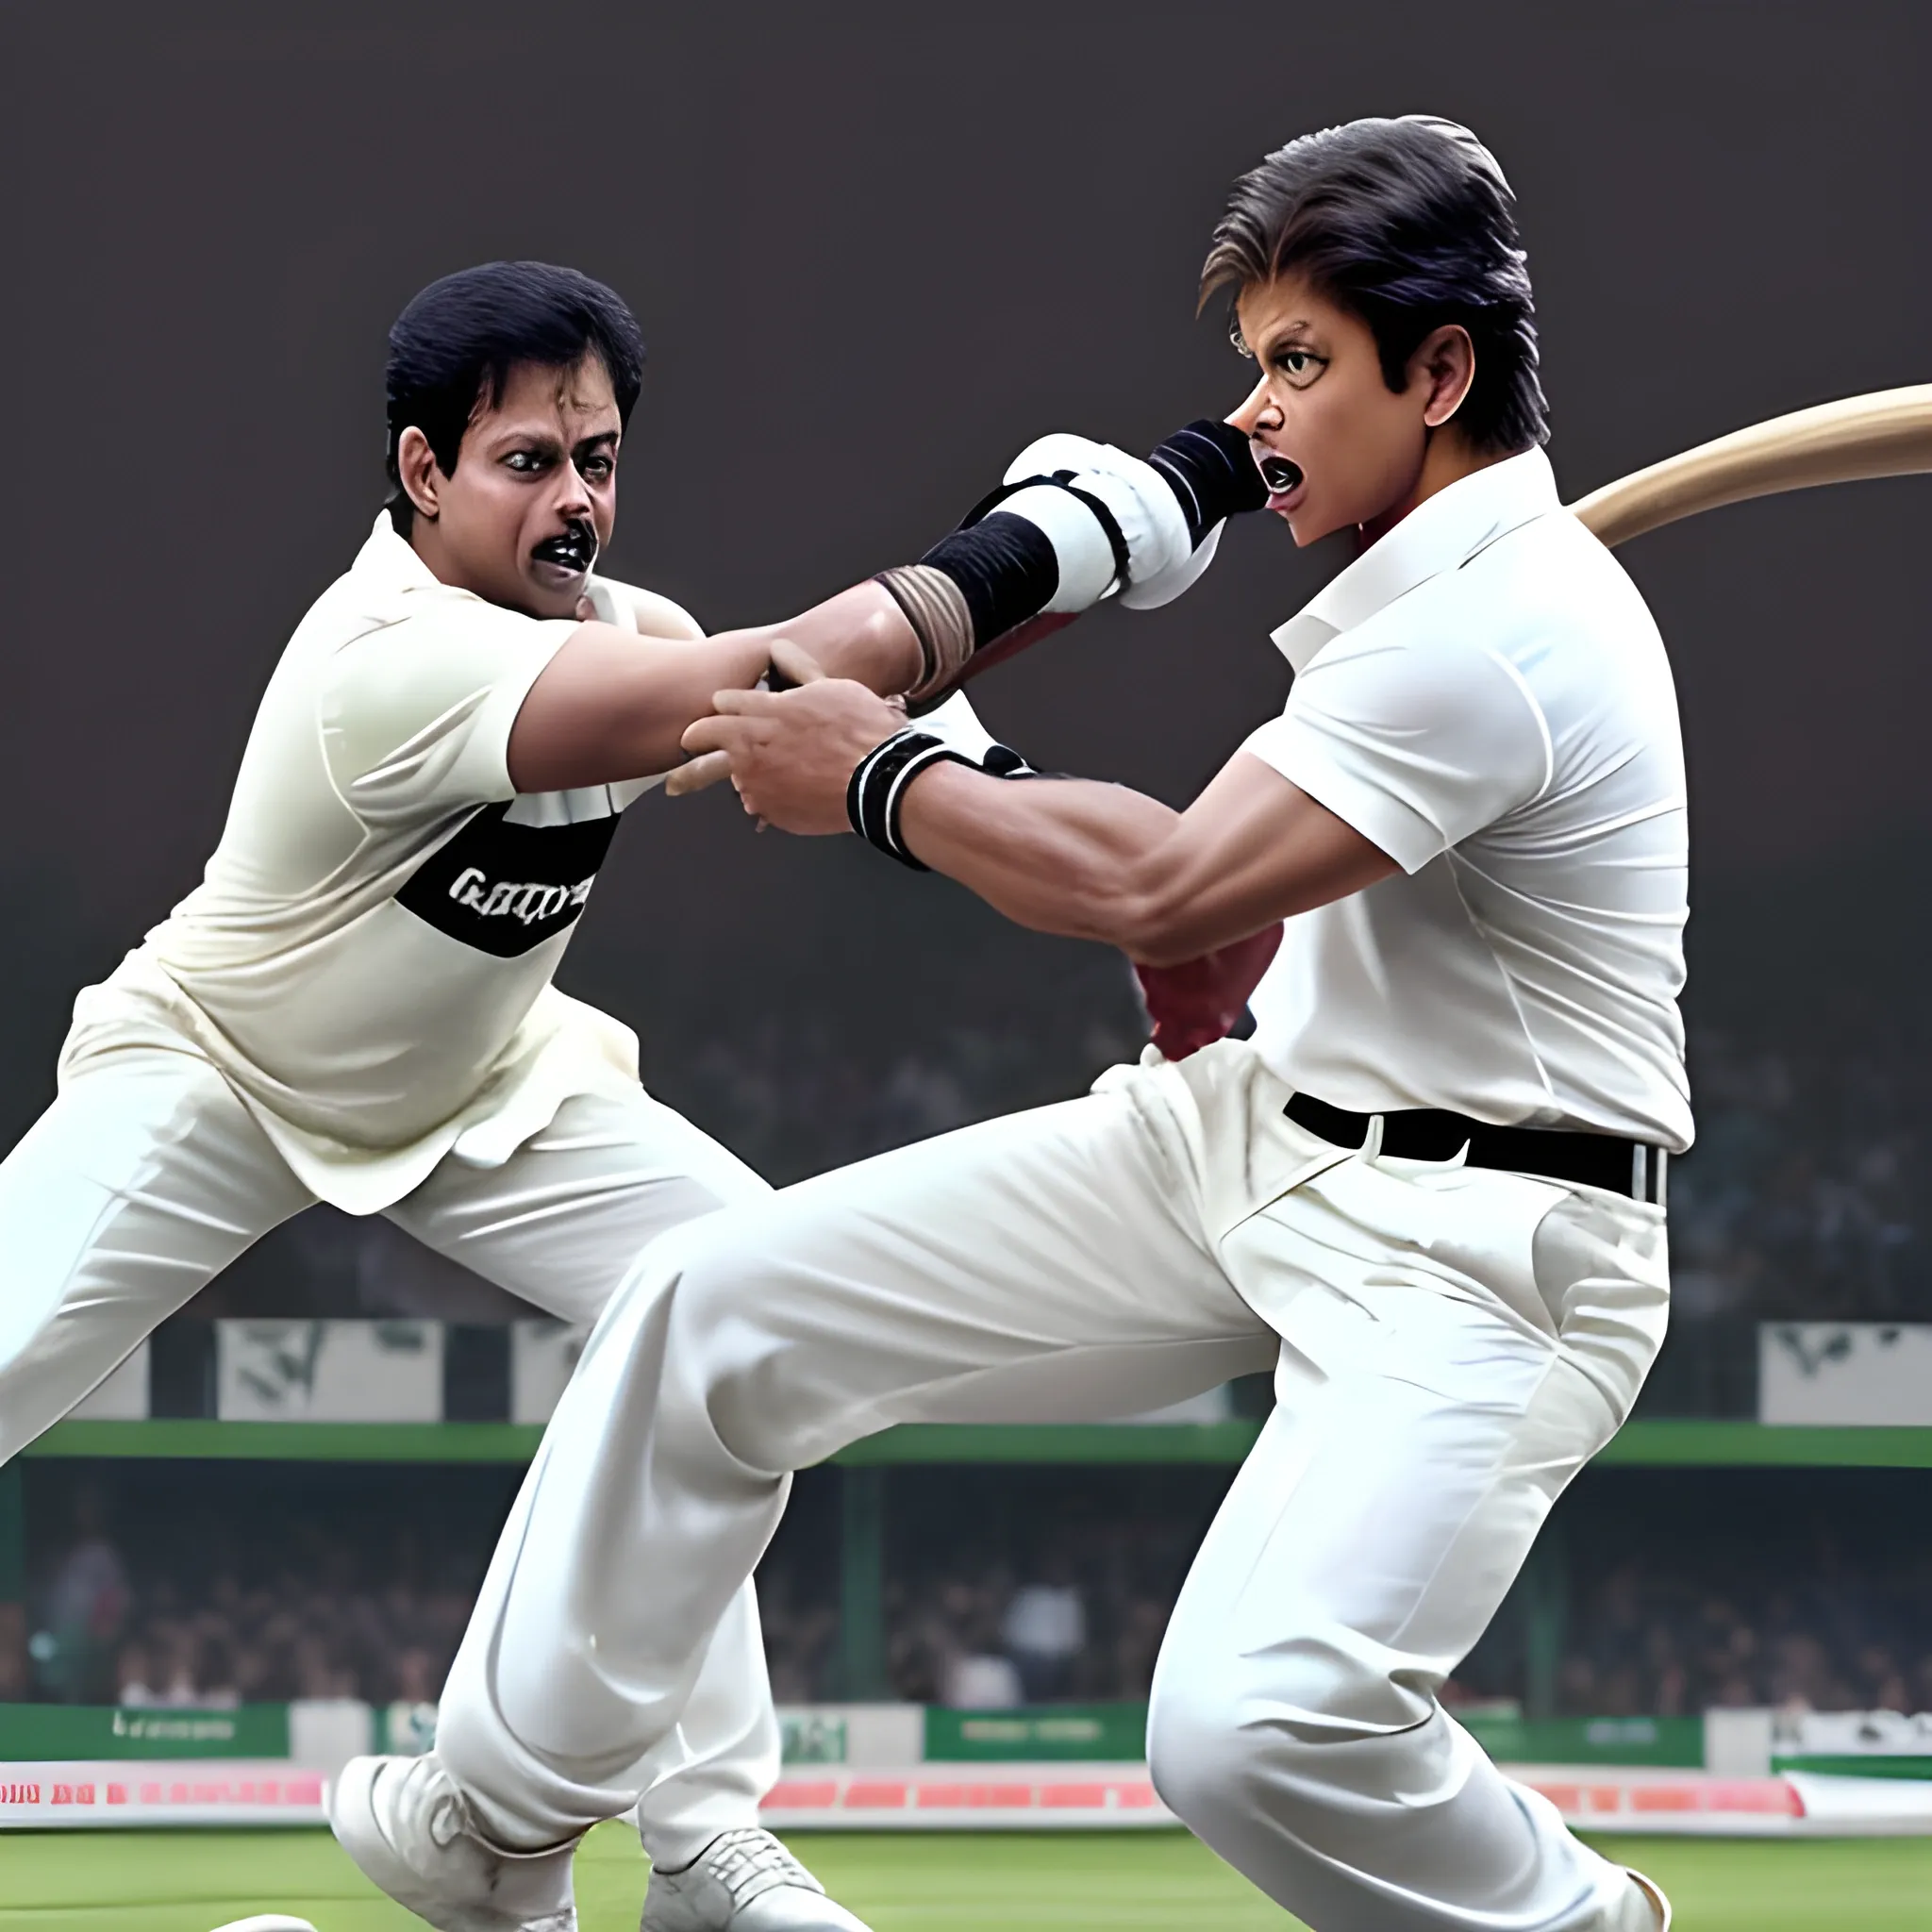 a photo of ((Salman Khan)) and ((Shah Rukh Khan)) fighting with each other very badly with their bats in hand, ultra HD, hyper realistic, great face details, ((Rahul Gandhi)) crying very badly in background.